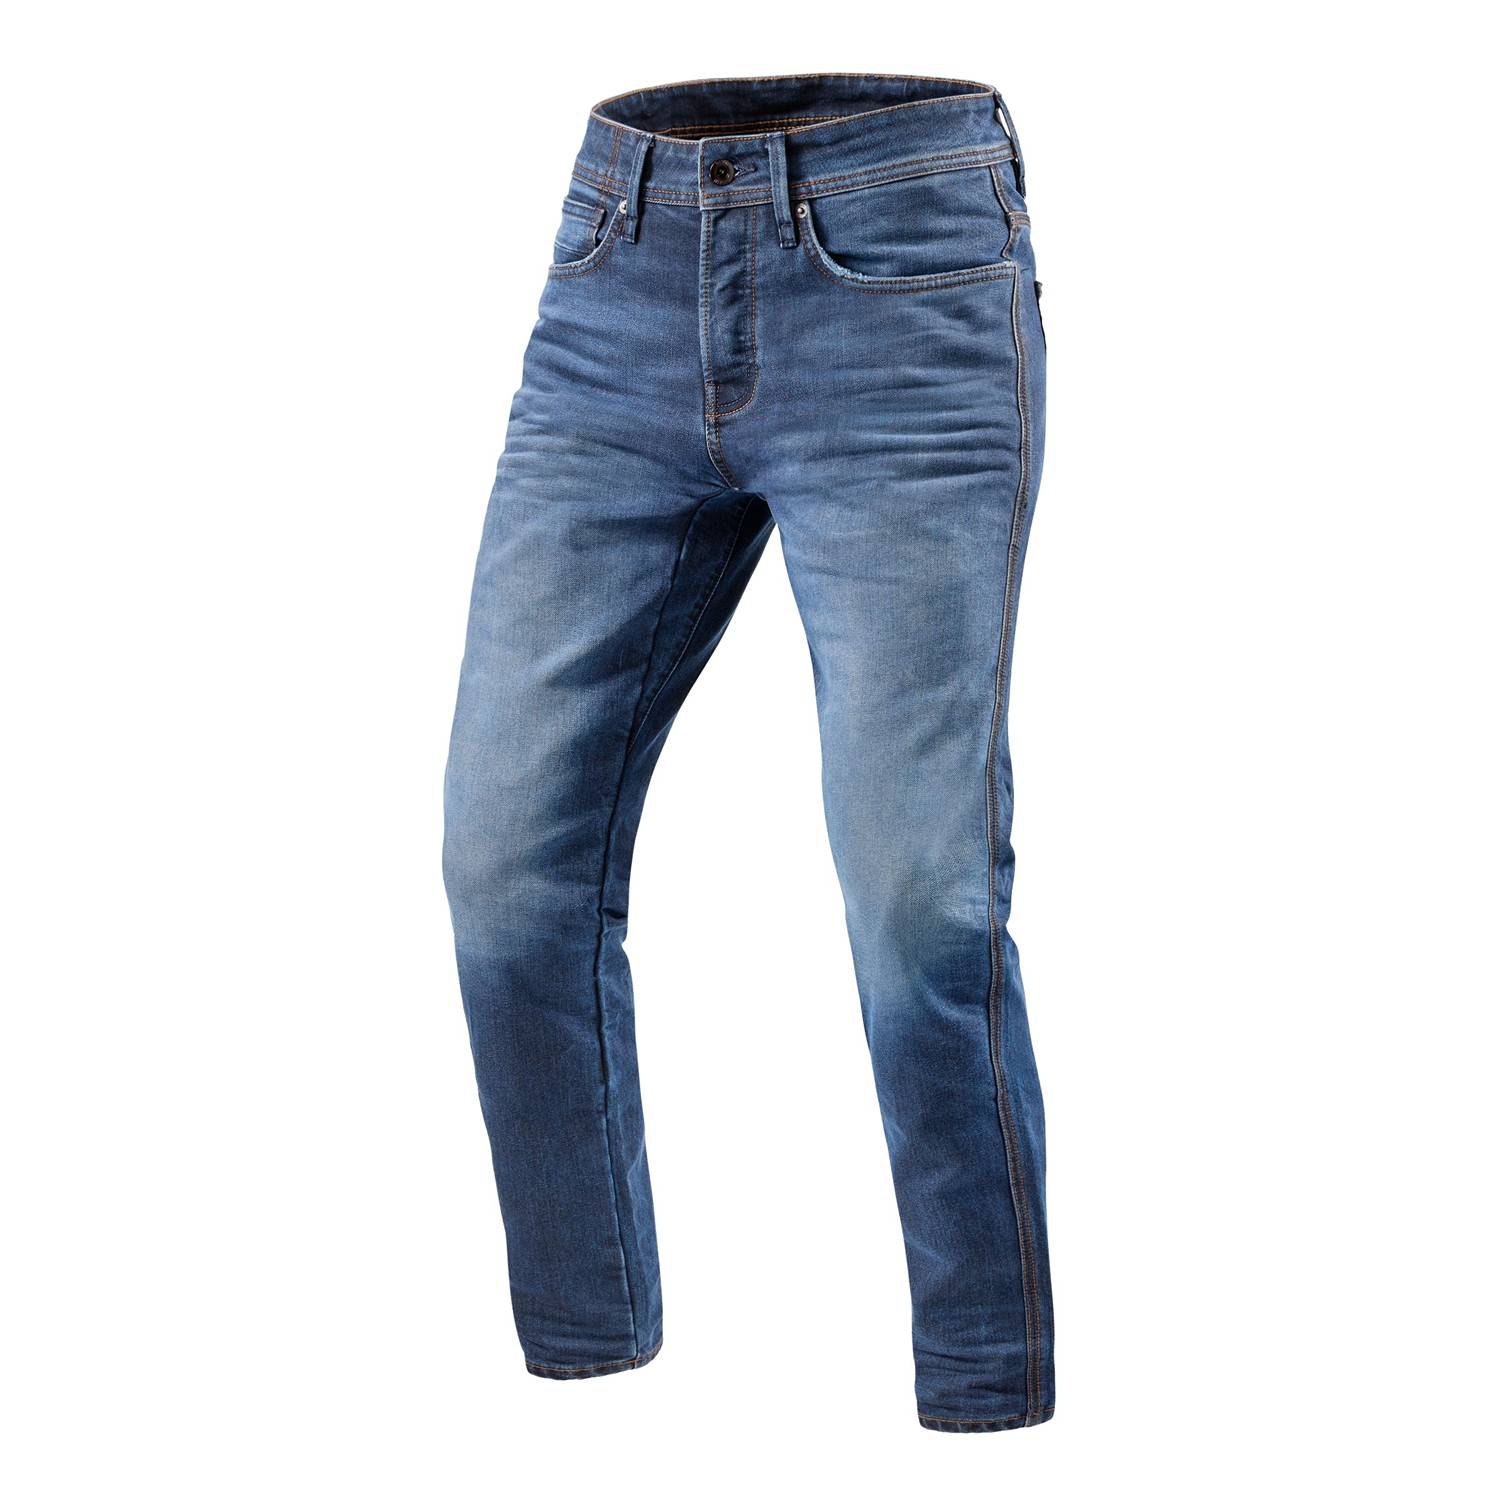 Image of REV'IT! Jeans Reed SF Mid Blue Used Motorcycle Jeans Size L32/W28 ID 8700001337229